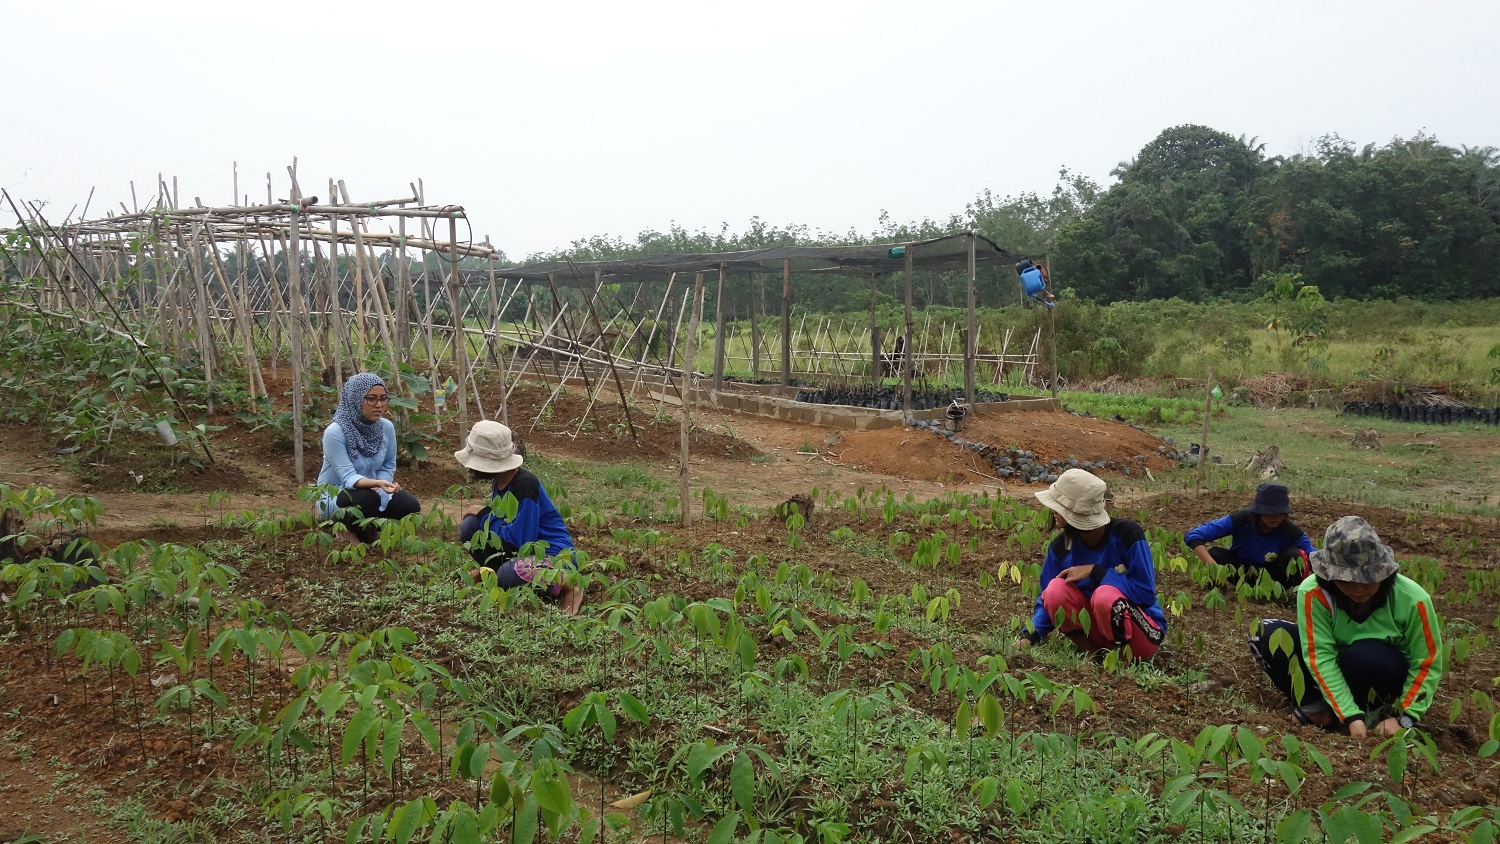 Mapping Out the Unmet Needs of Farmers in Kalimantan and Papua